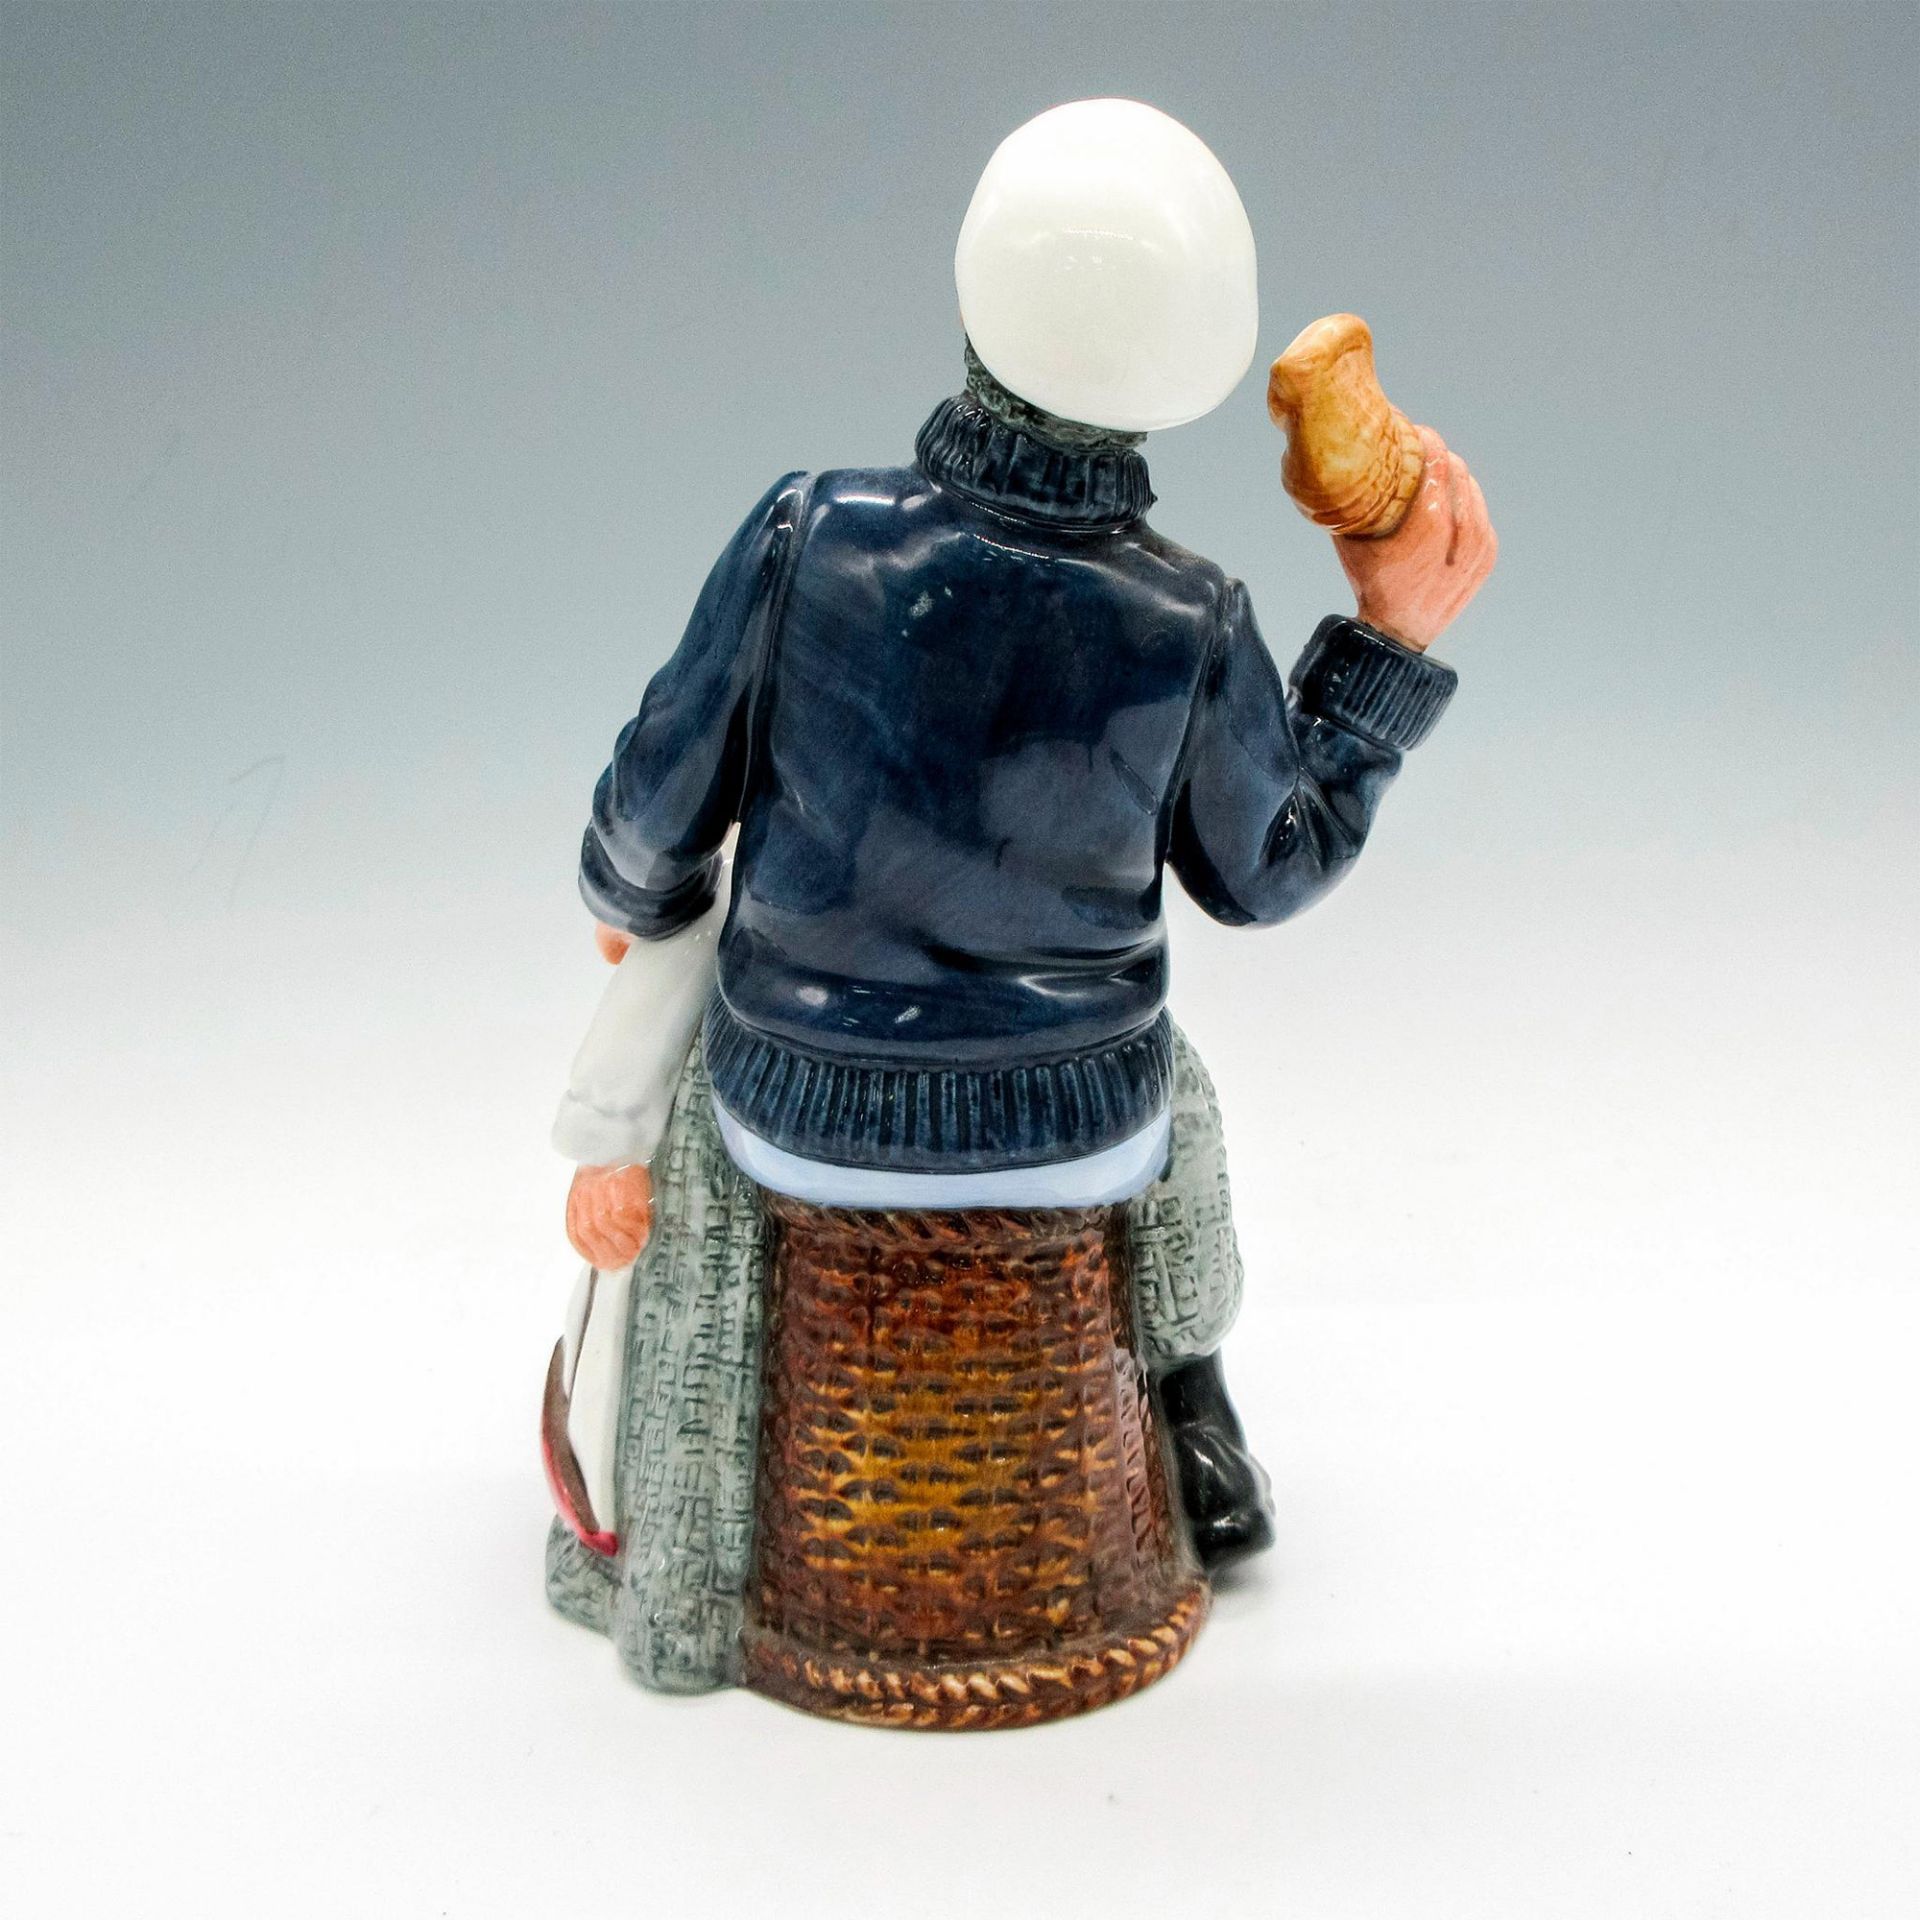 Song of the Sea - HN2729 - Royal Doulton Figurine - Image 2 of 3